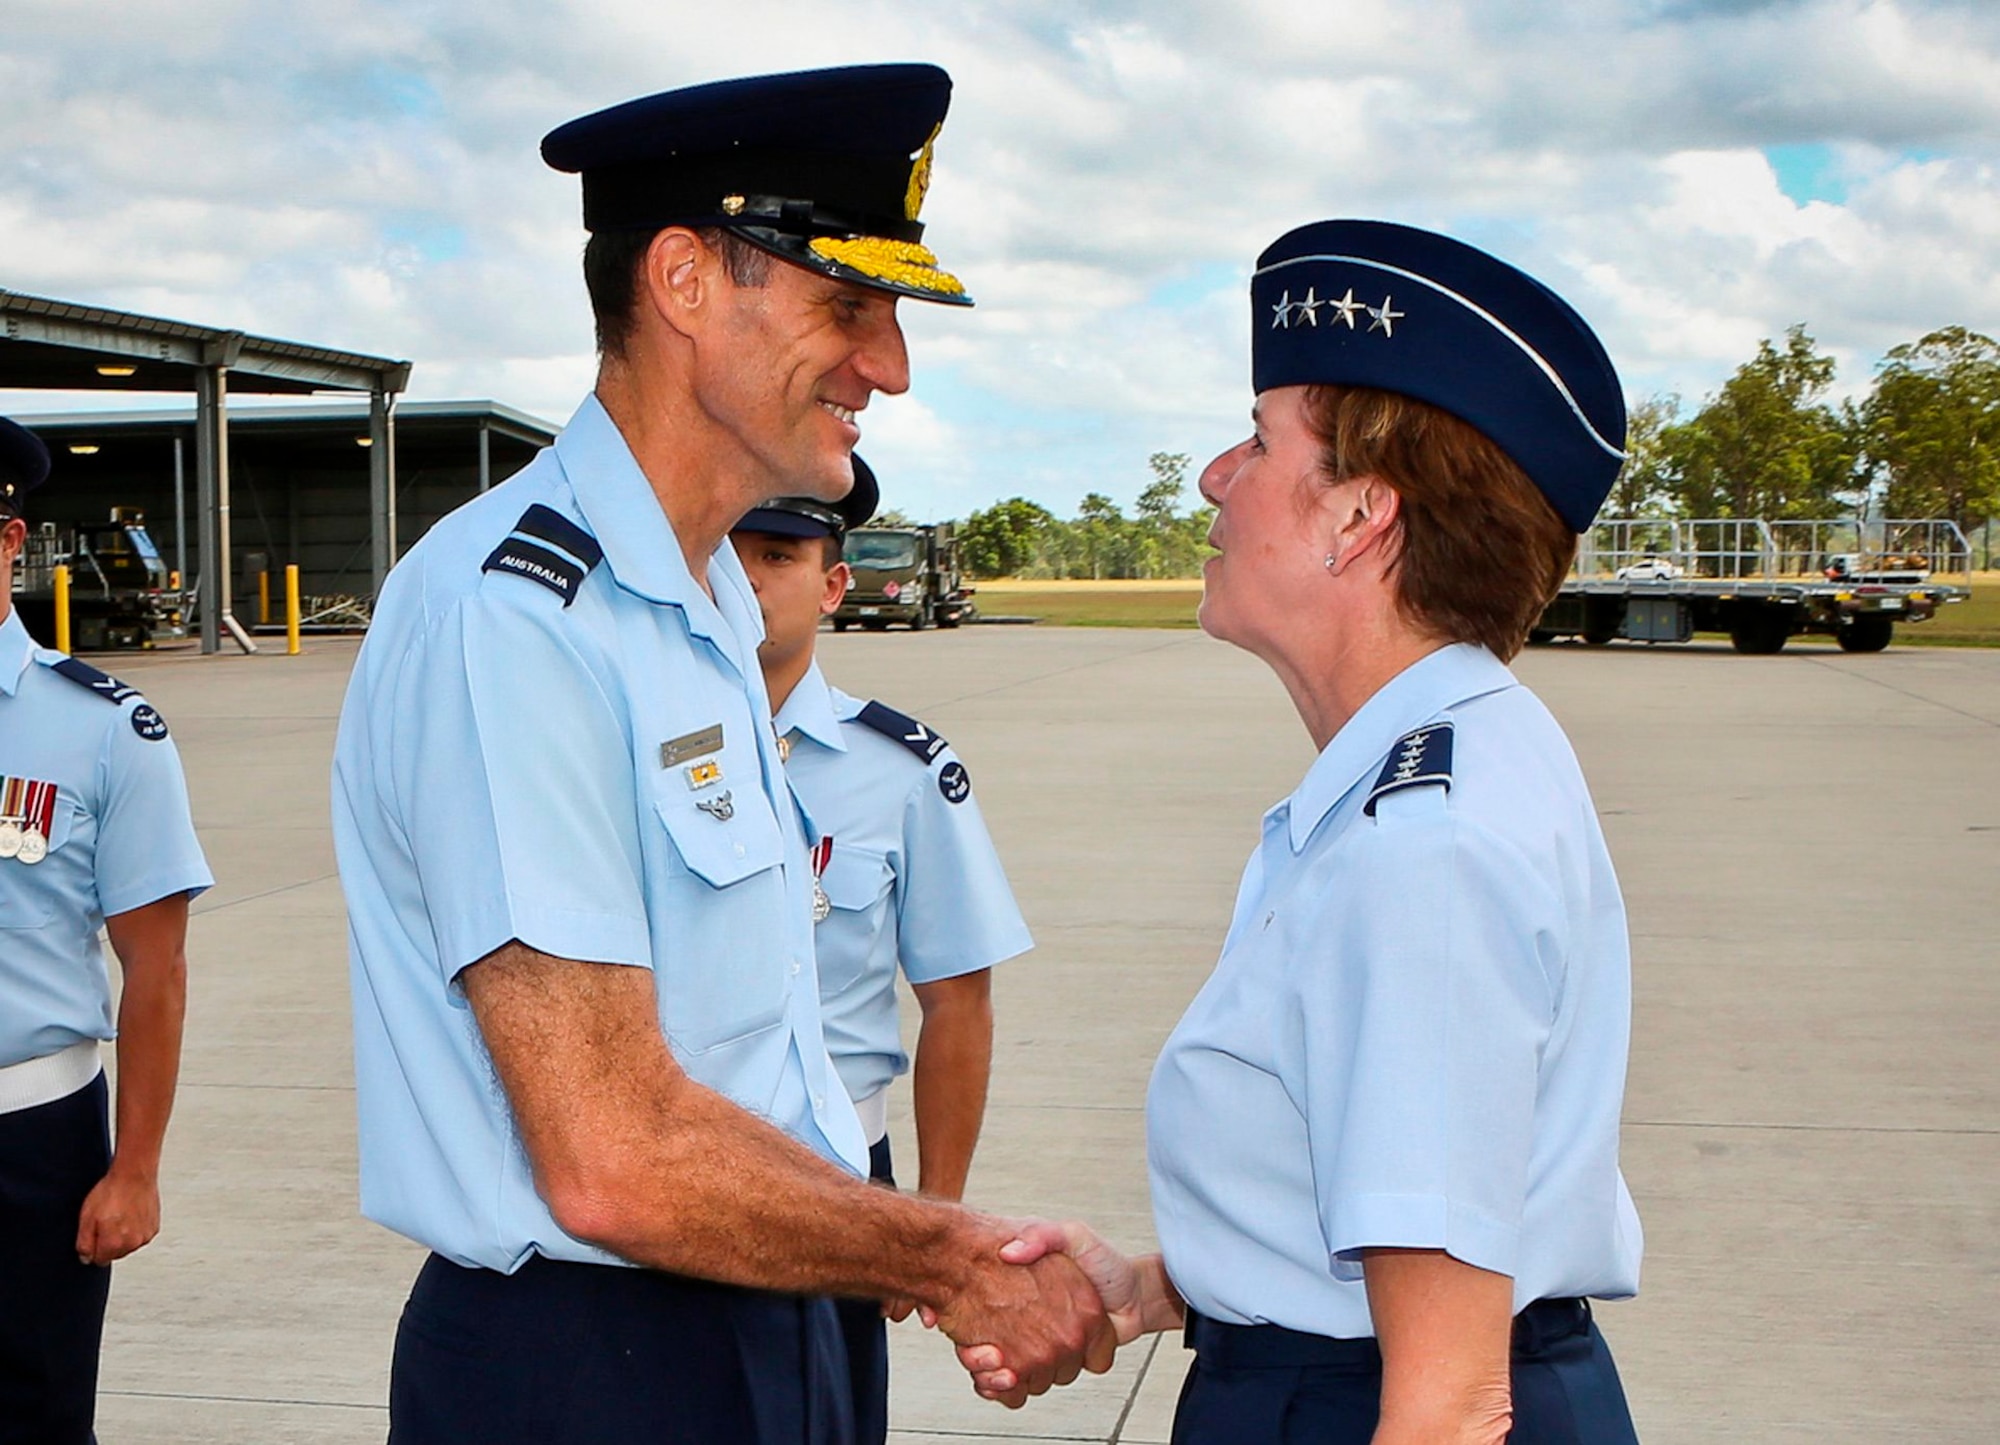 Gen. Lori Robinson, Pacific Air Forces commander, is greeted by Senior Australia Defence Forces Officer, Air Commodore Scott Winchester, upon her arrival at Royal Australian Air Force Base Amberley, March 10, 2016. The visit to RAAF Base Amberley was part of Robinson’s two-week visit to New Zealand and Australia, which served to improve relations with both nations and reaffirmed PACAF’s commitment to the rebalance in the Pacific. (Photo by RAAF LAC Brenton Kwaterski)